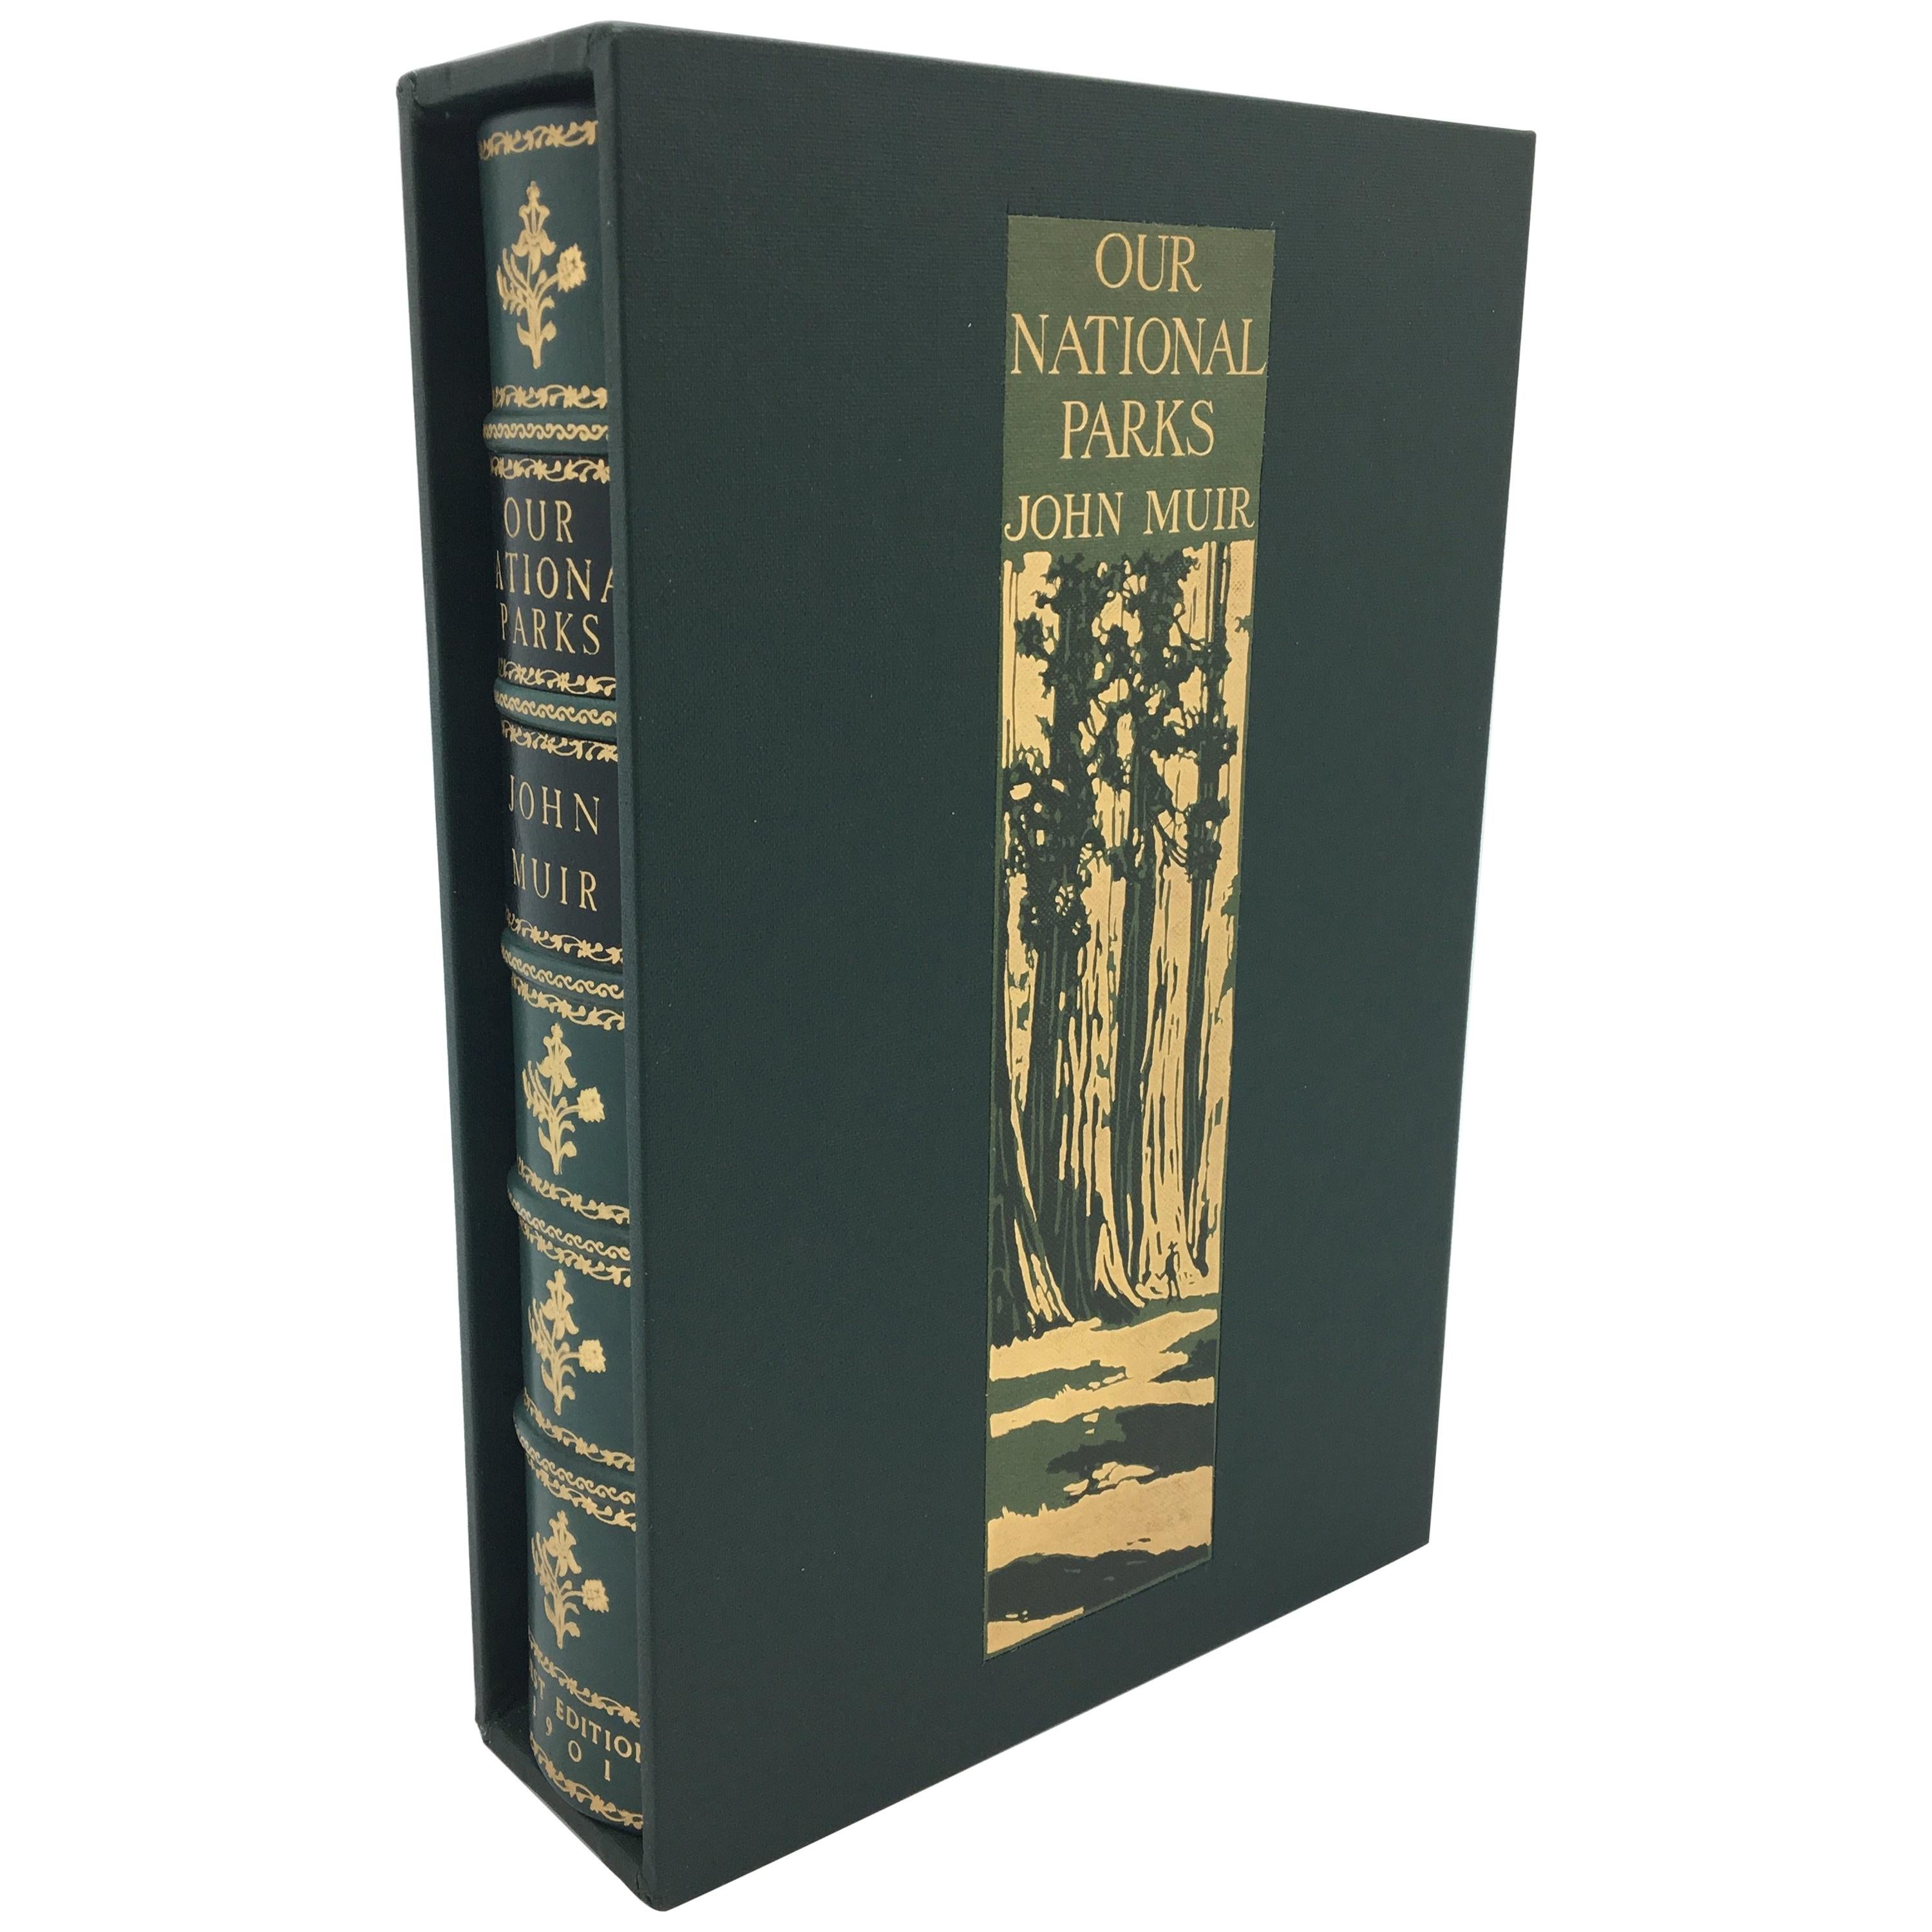 Our National Parks by John Muir, First Edition, 1901